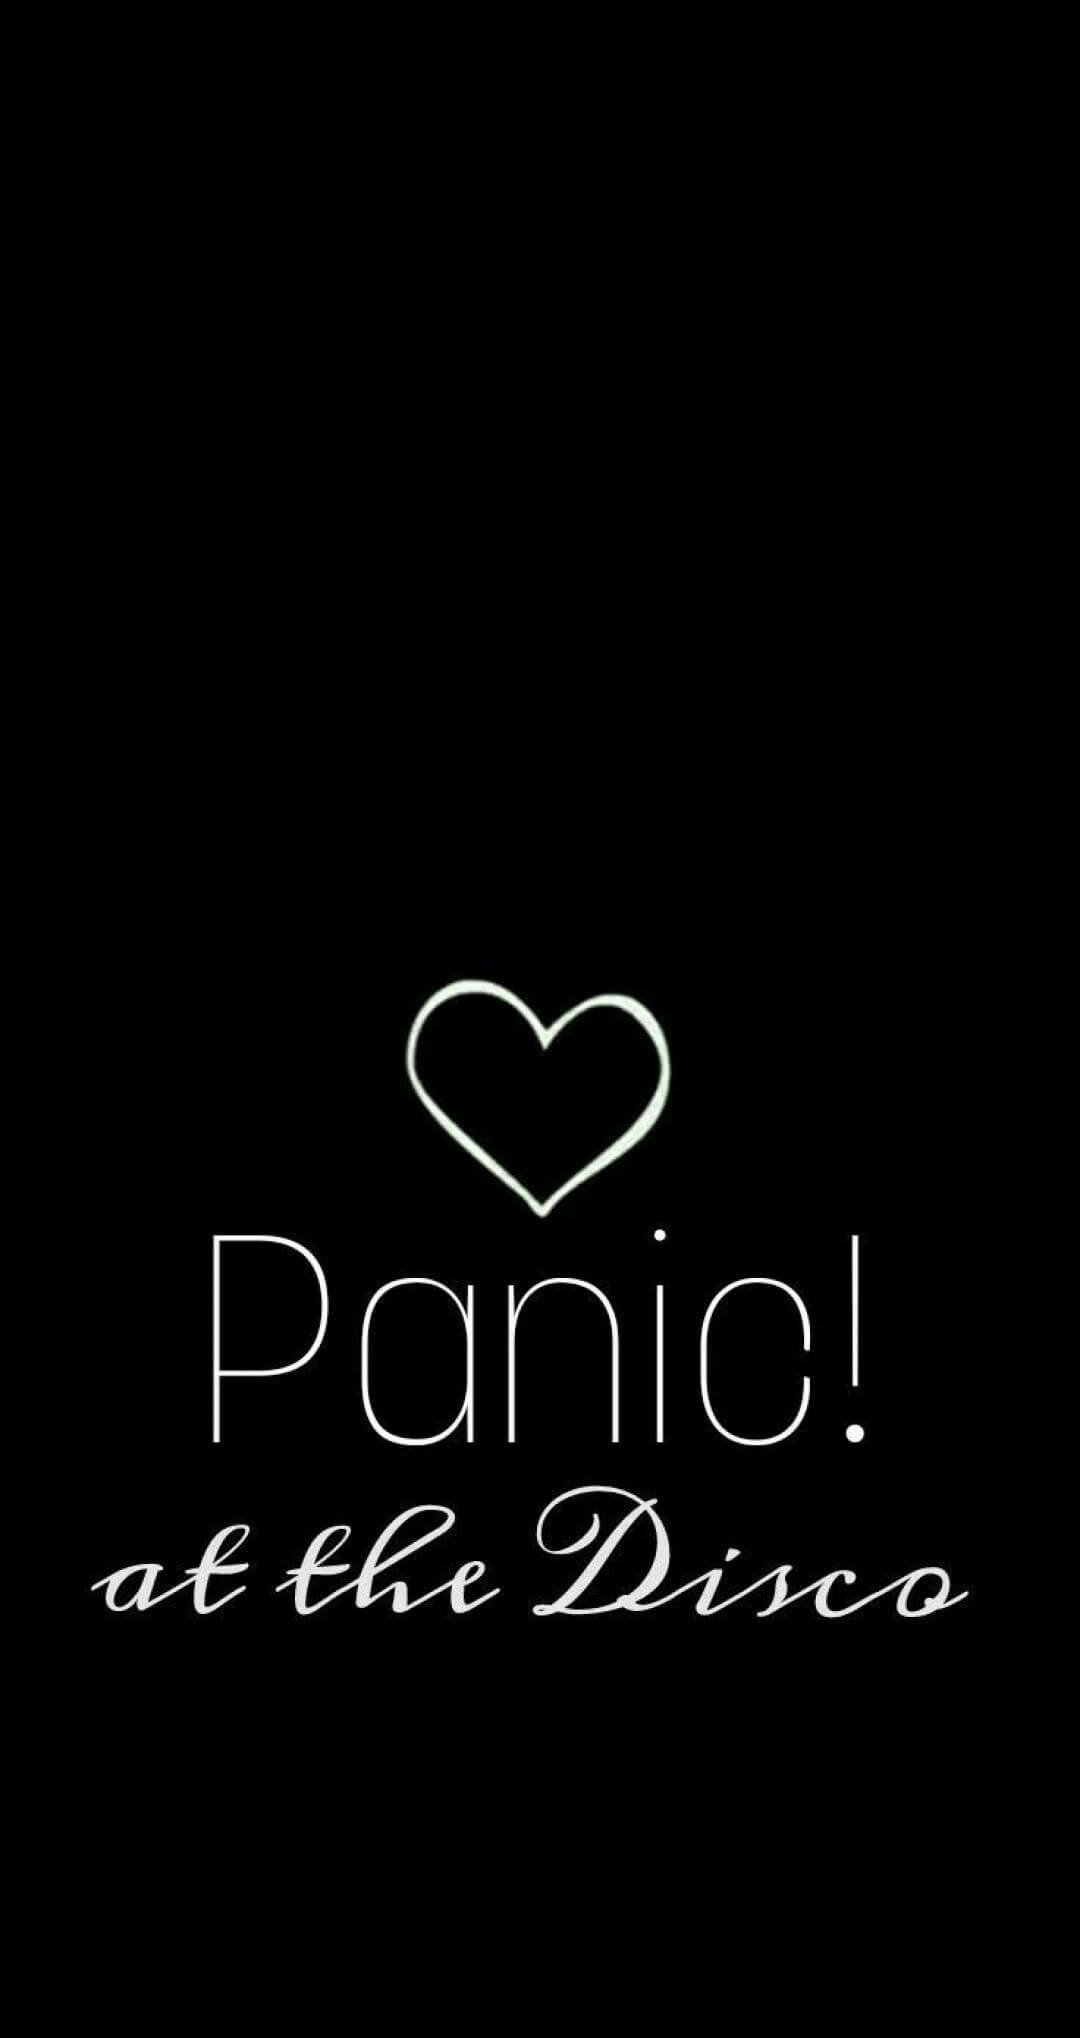 Panic at the disco HD Quote Black Love Emo iphone wallpaper